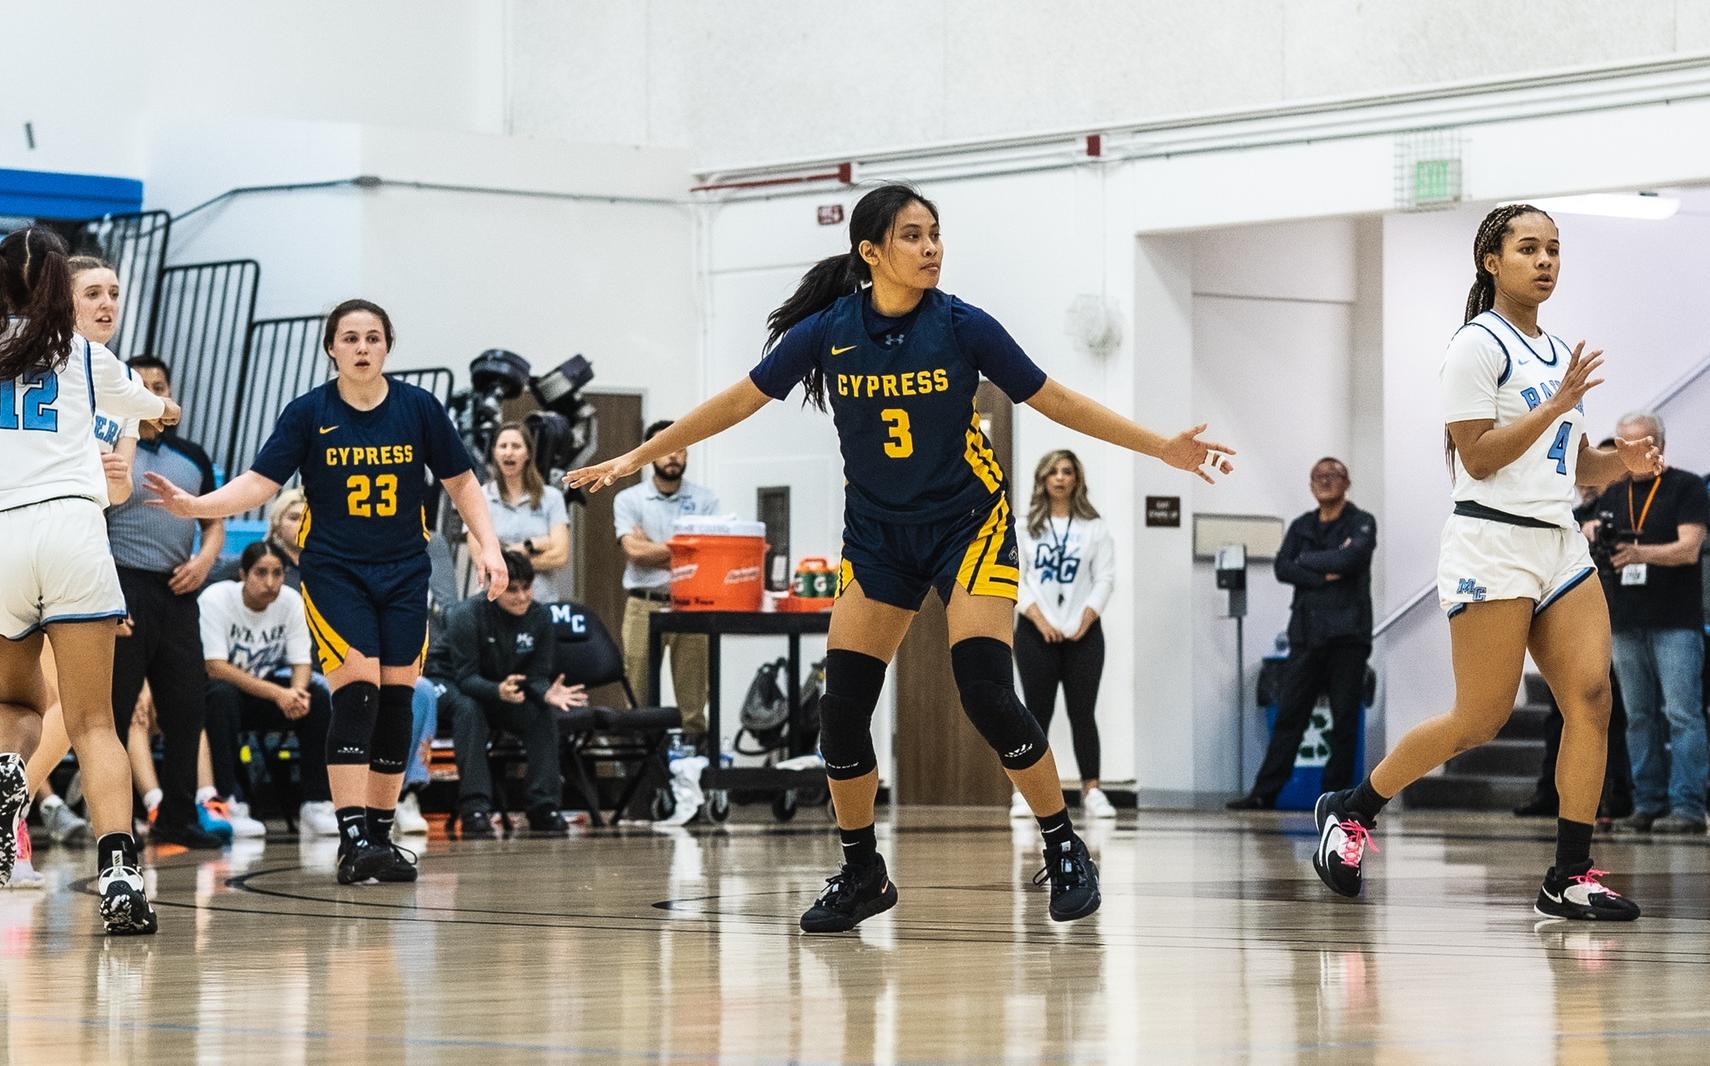 The Chargers End their Postseason in the Quarterfinals of the CCCAA State Tournament